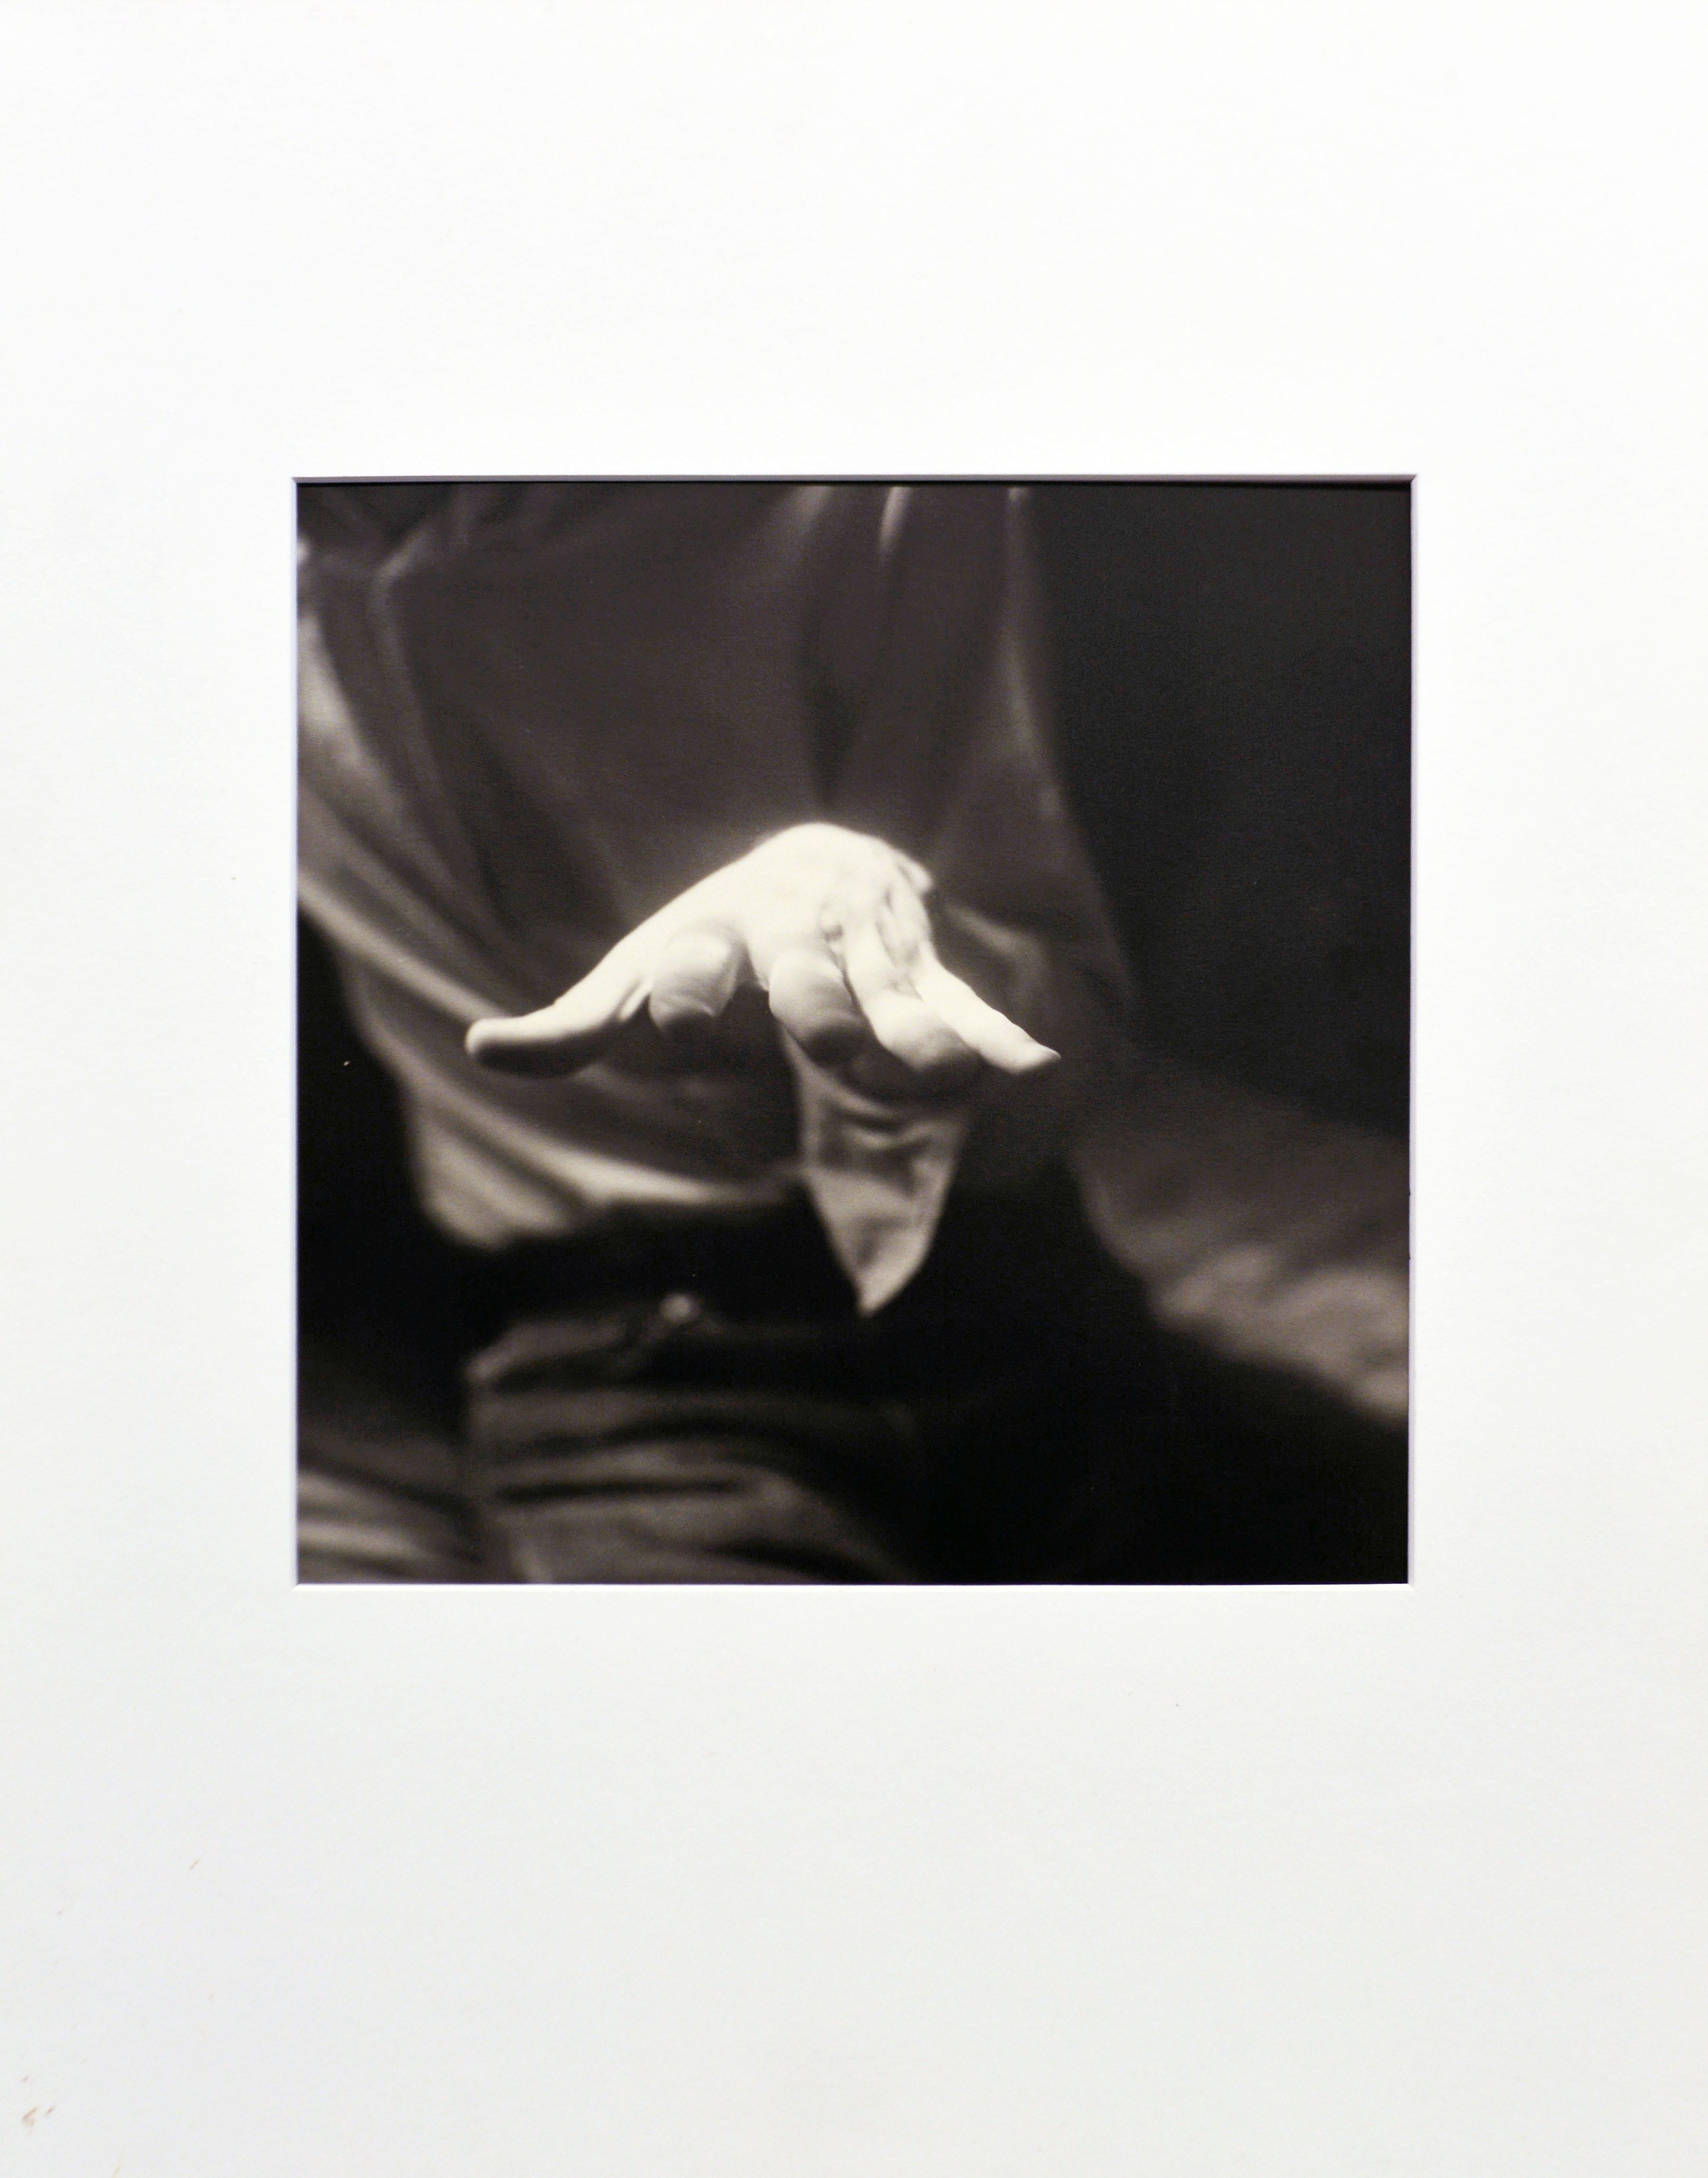 Unidentified artist.
Photograph of a Hand, 1989
Silver gelatin print mounted on backing. Signed, titled and numbered illegibly verso. No margins. Image: 9 x 9 in / 23 x 23 cm. Mat: 14 x 18 in / 35.5 x 45.75 cm.